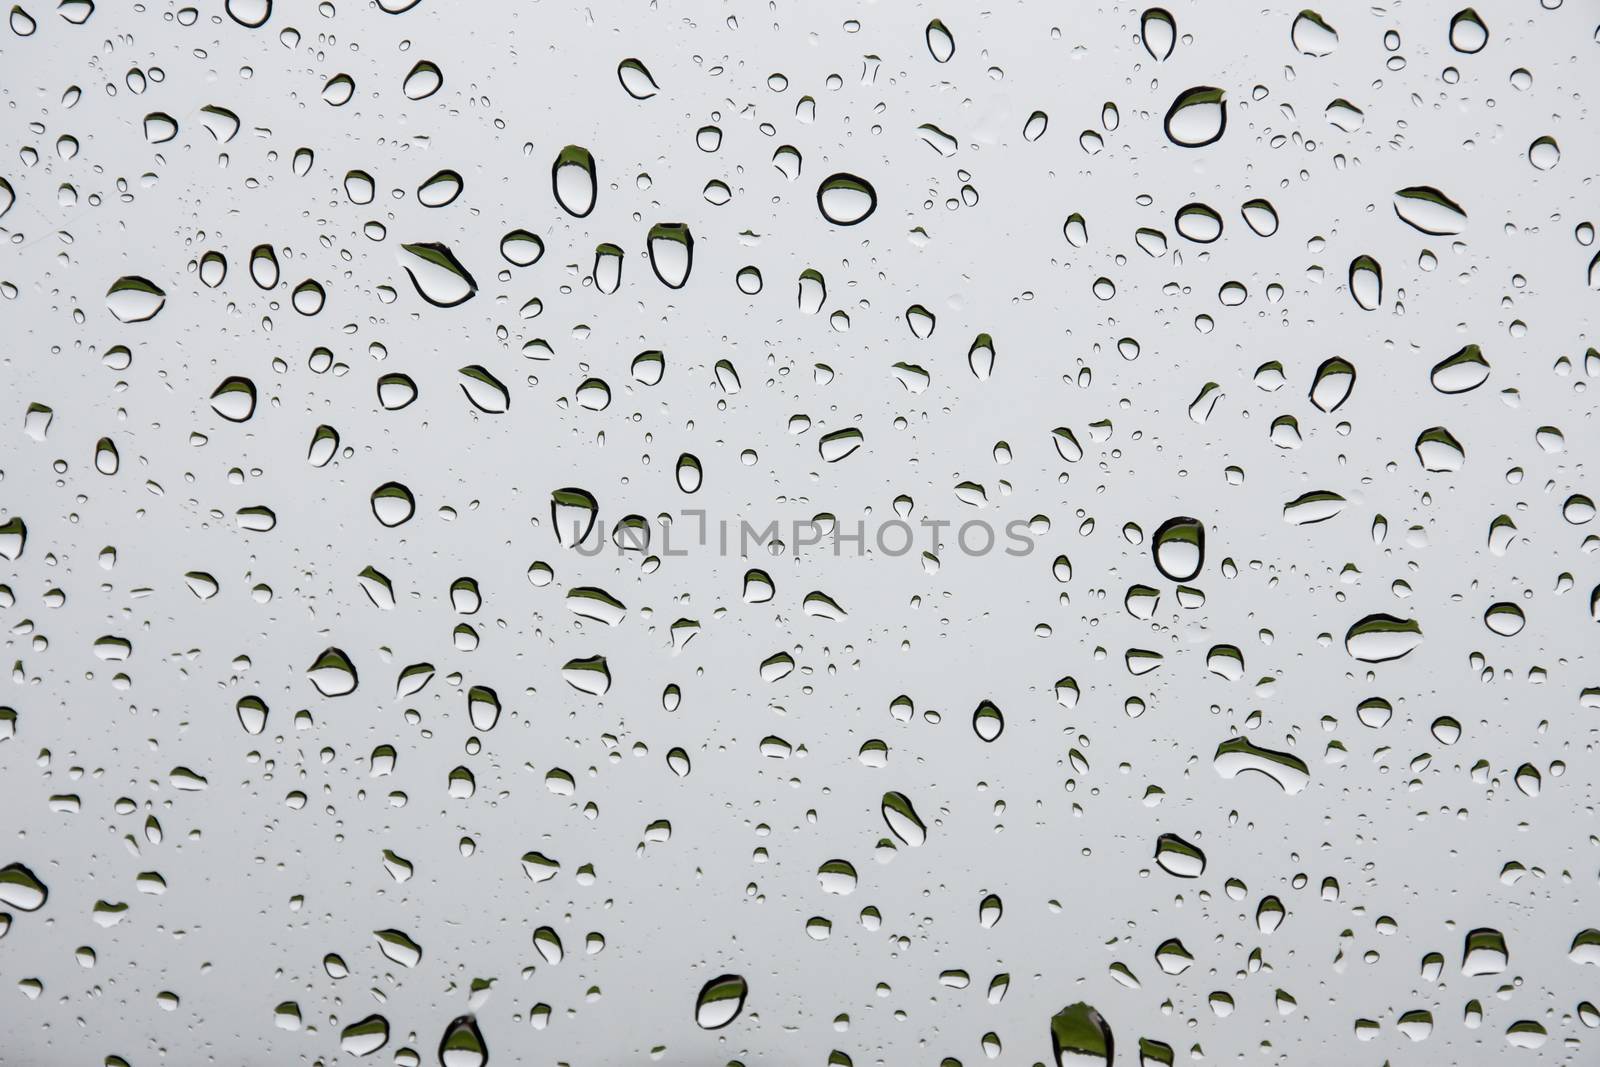 Water background with water droplets on glass, gray-white backdrop